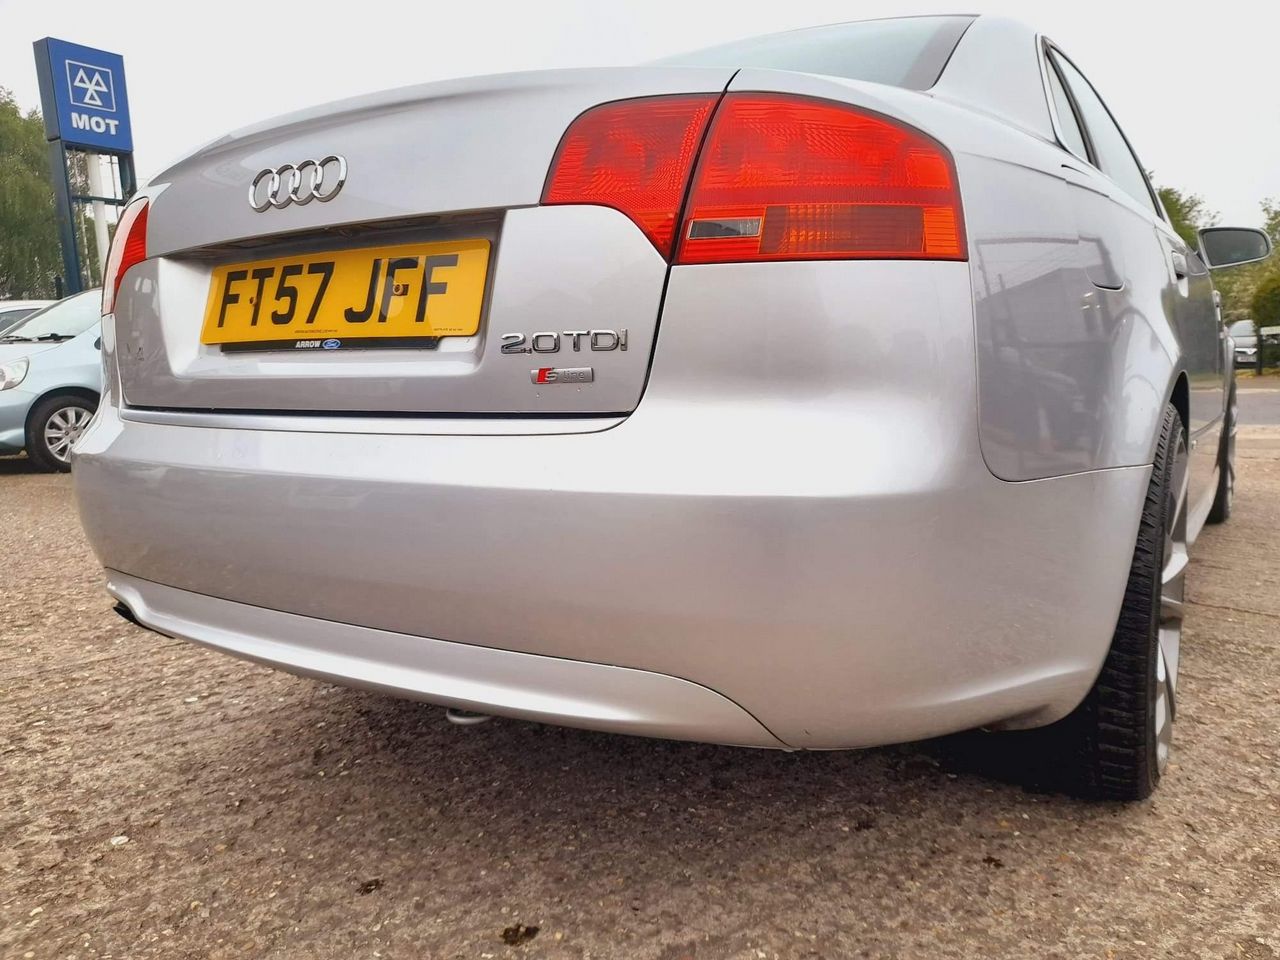 2008 Audi A4 2.0 TDI S line CVT 4dr - Picture 13 of 50